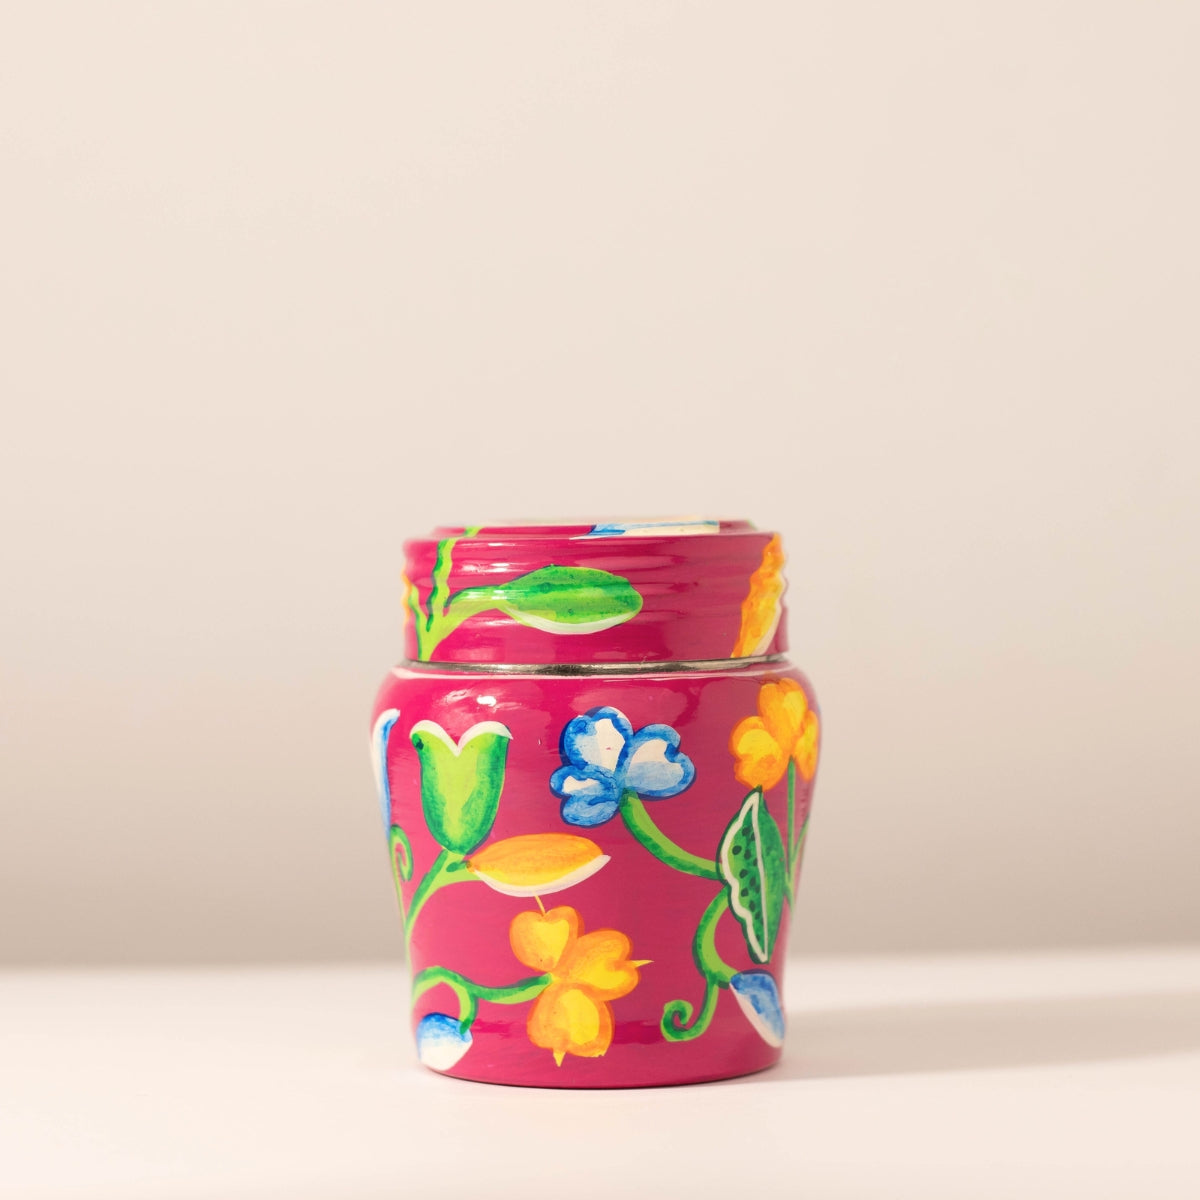 Hand painted Stainless Steel Canister in Pink